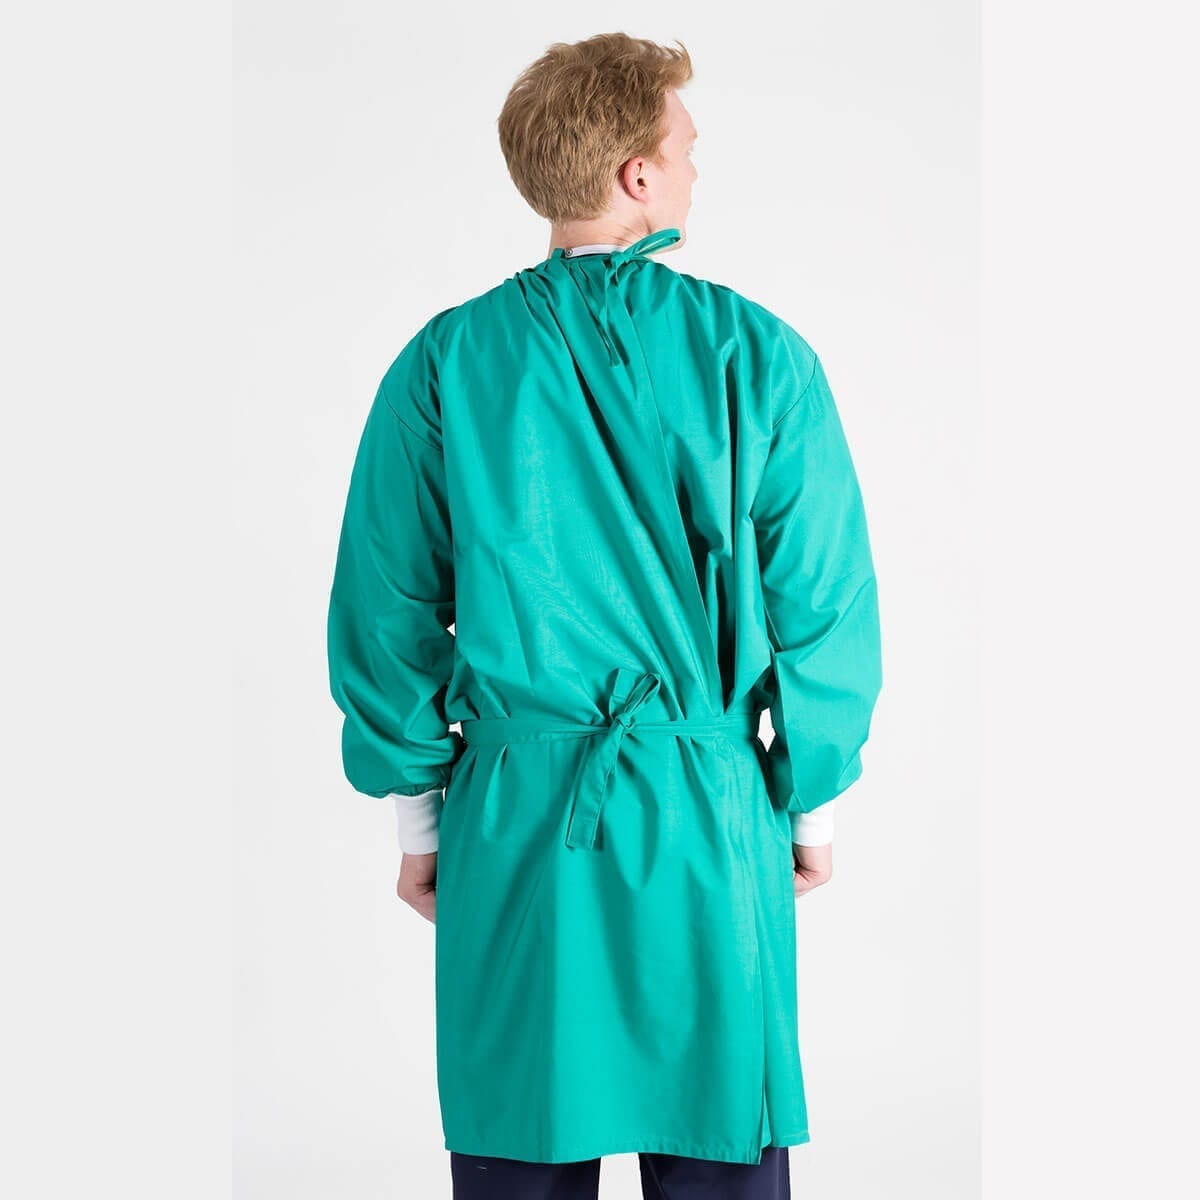 Patient Gowns For Hospital Use | Interweave Healthcare UK